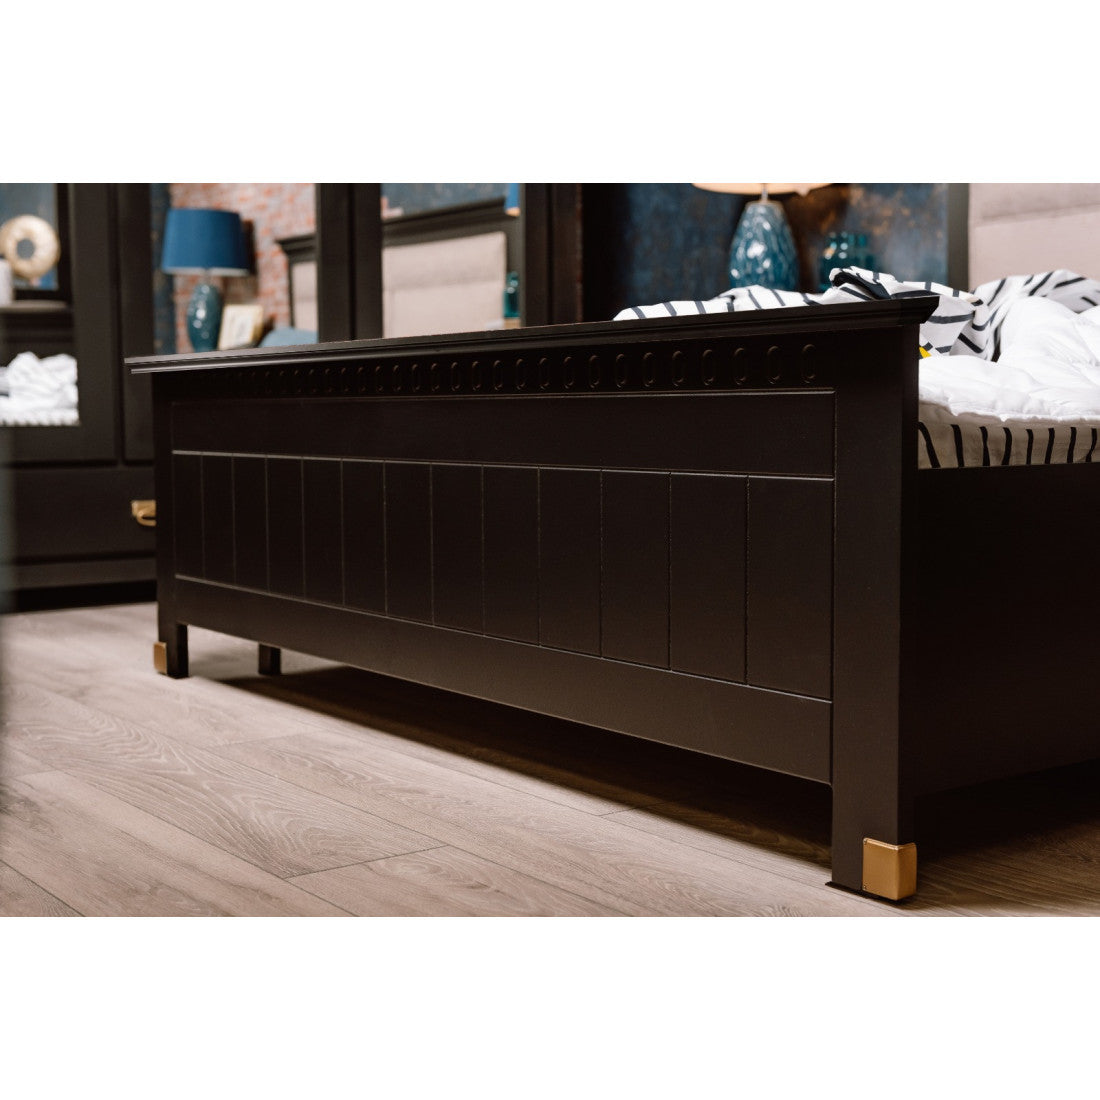 Saint Tropez Bedroom Set, Painted Black, Bed With Mattress Size 160 x 200 cm, Wardrobe and 2 bedside tables